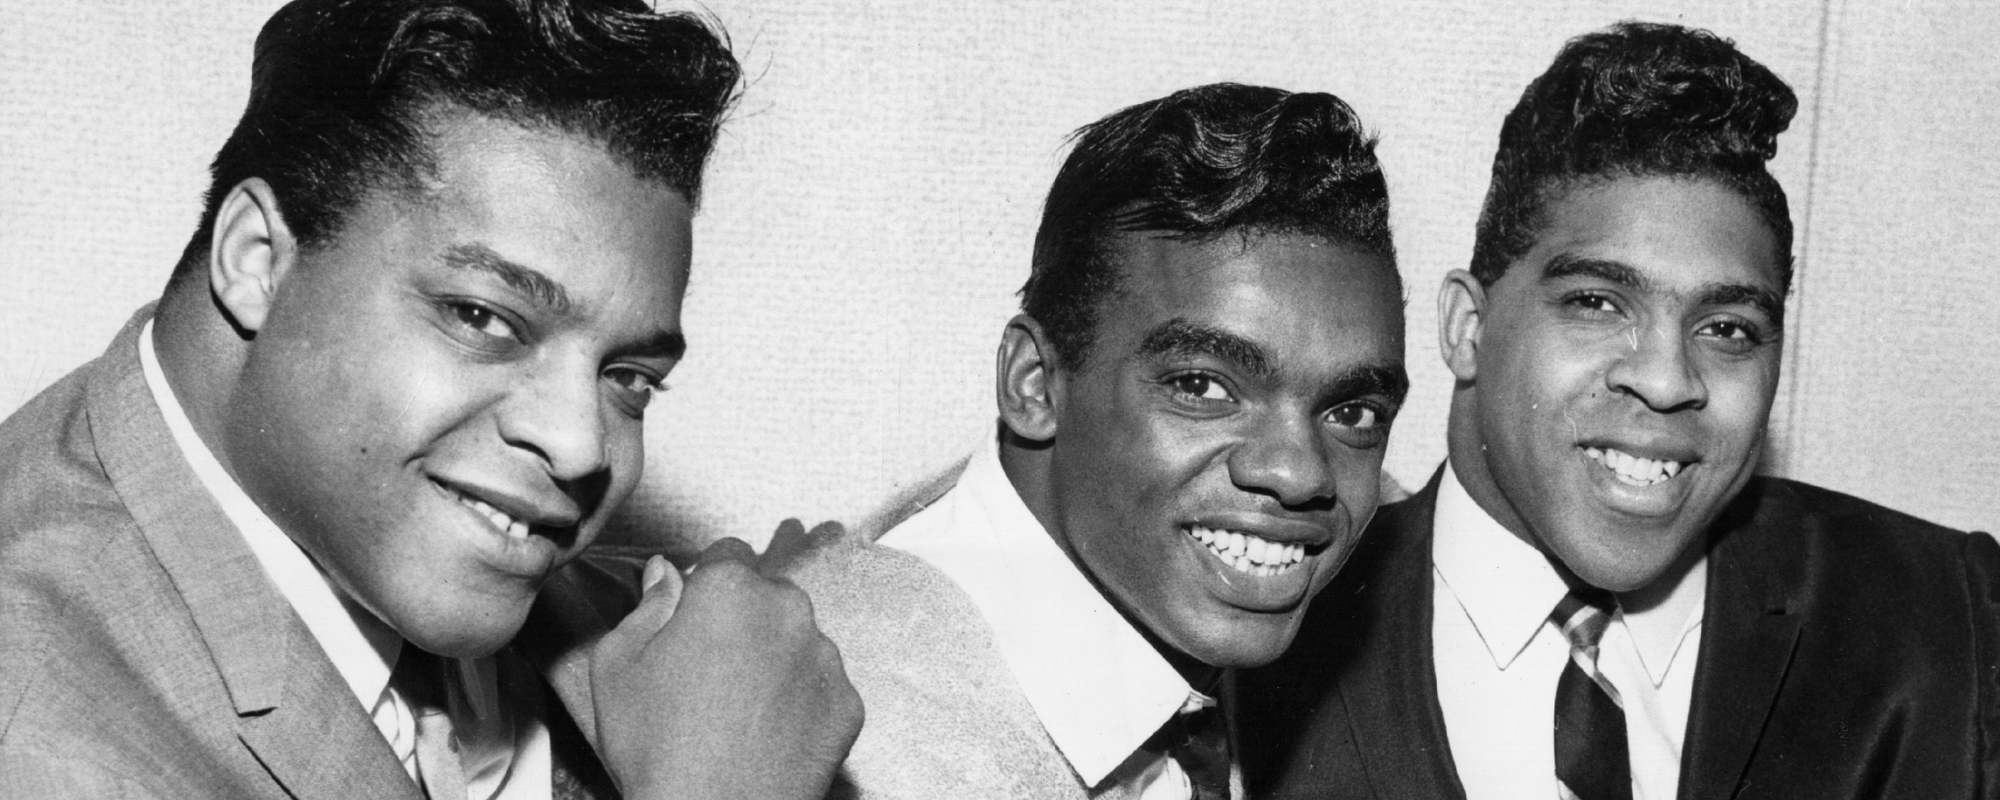 6 of the Isley Brothers’ Most Momentous Hits